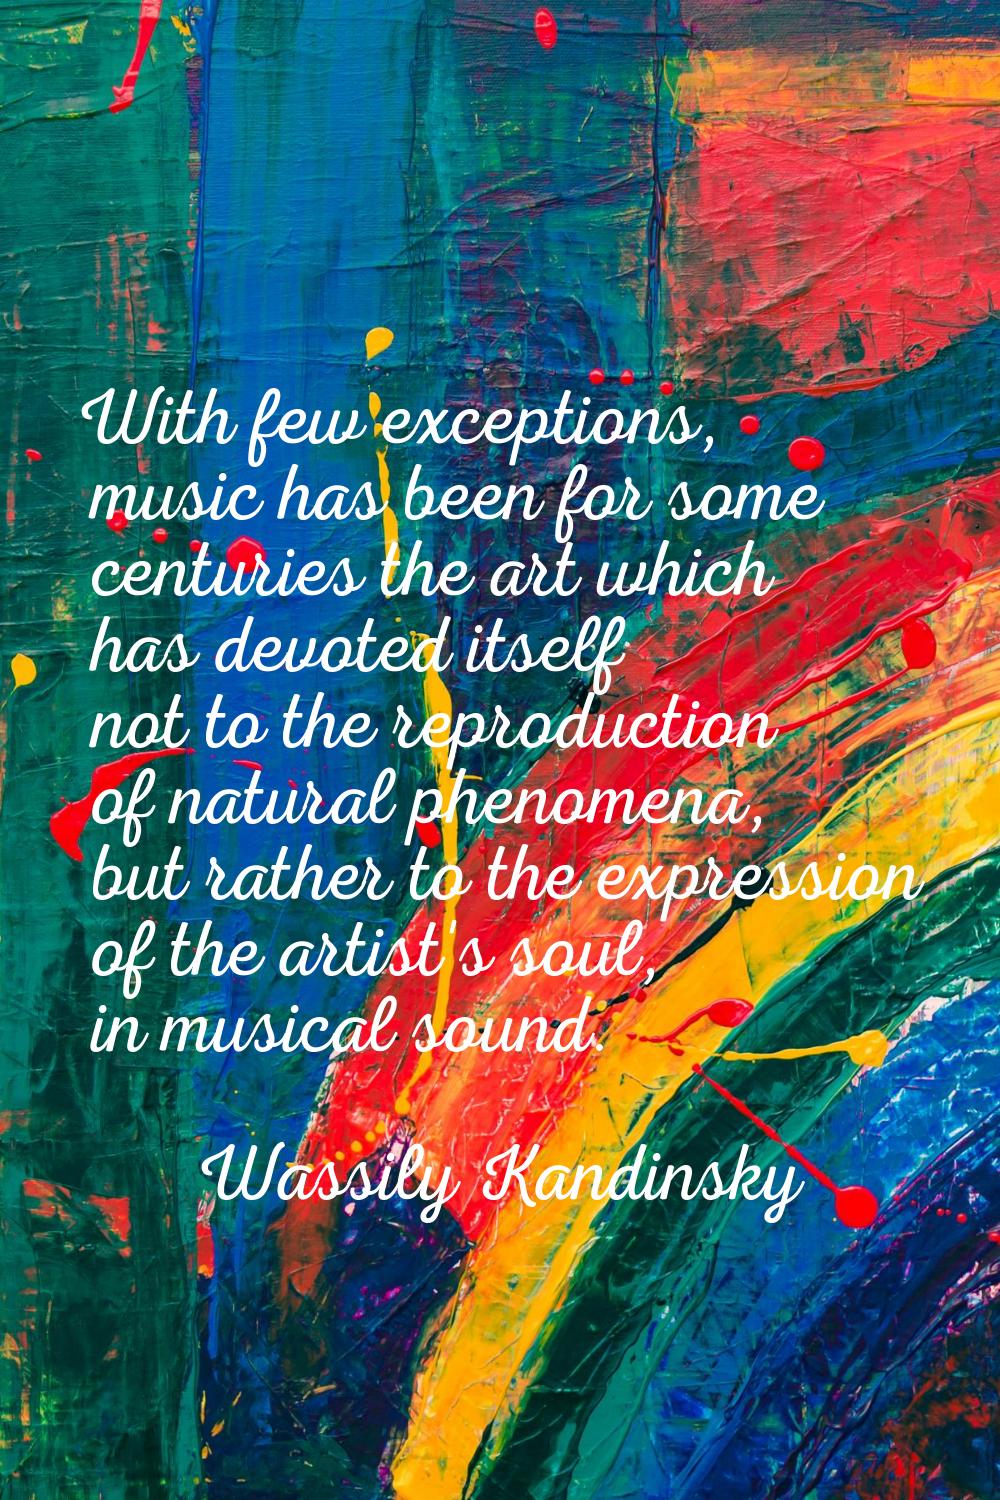 With few exceptions, music has been for some centuries the art which has devoted itself not to the 